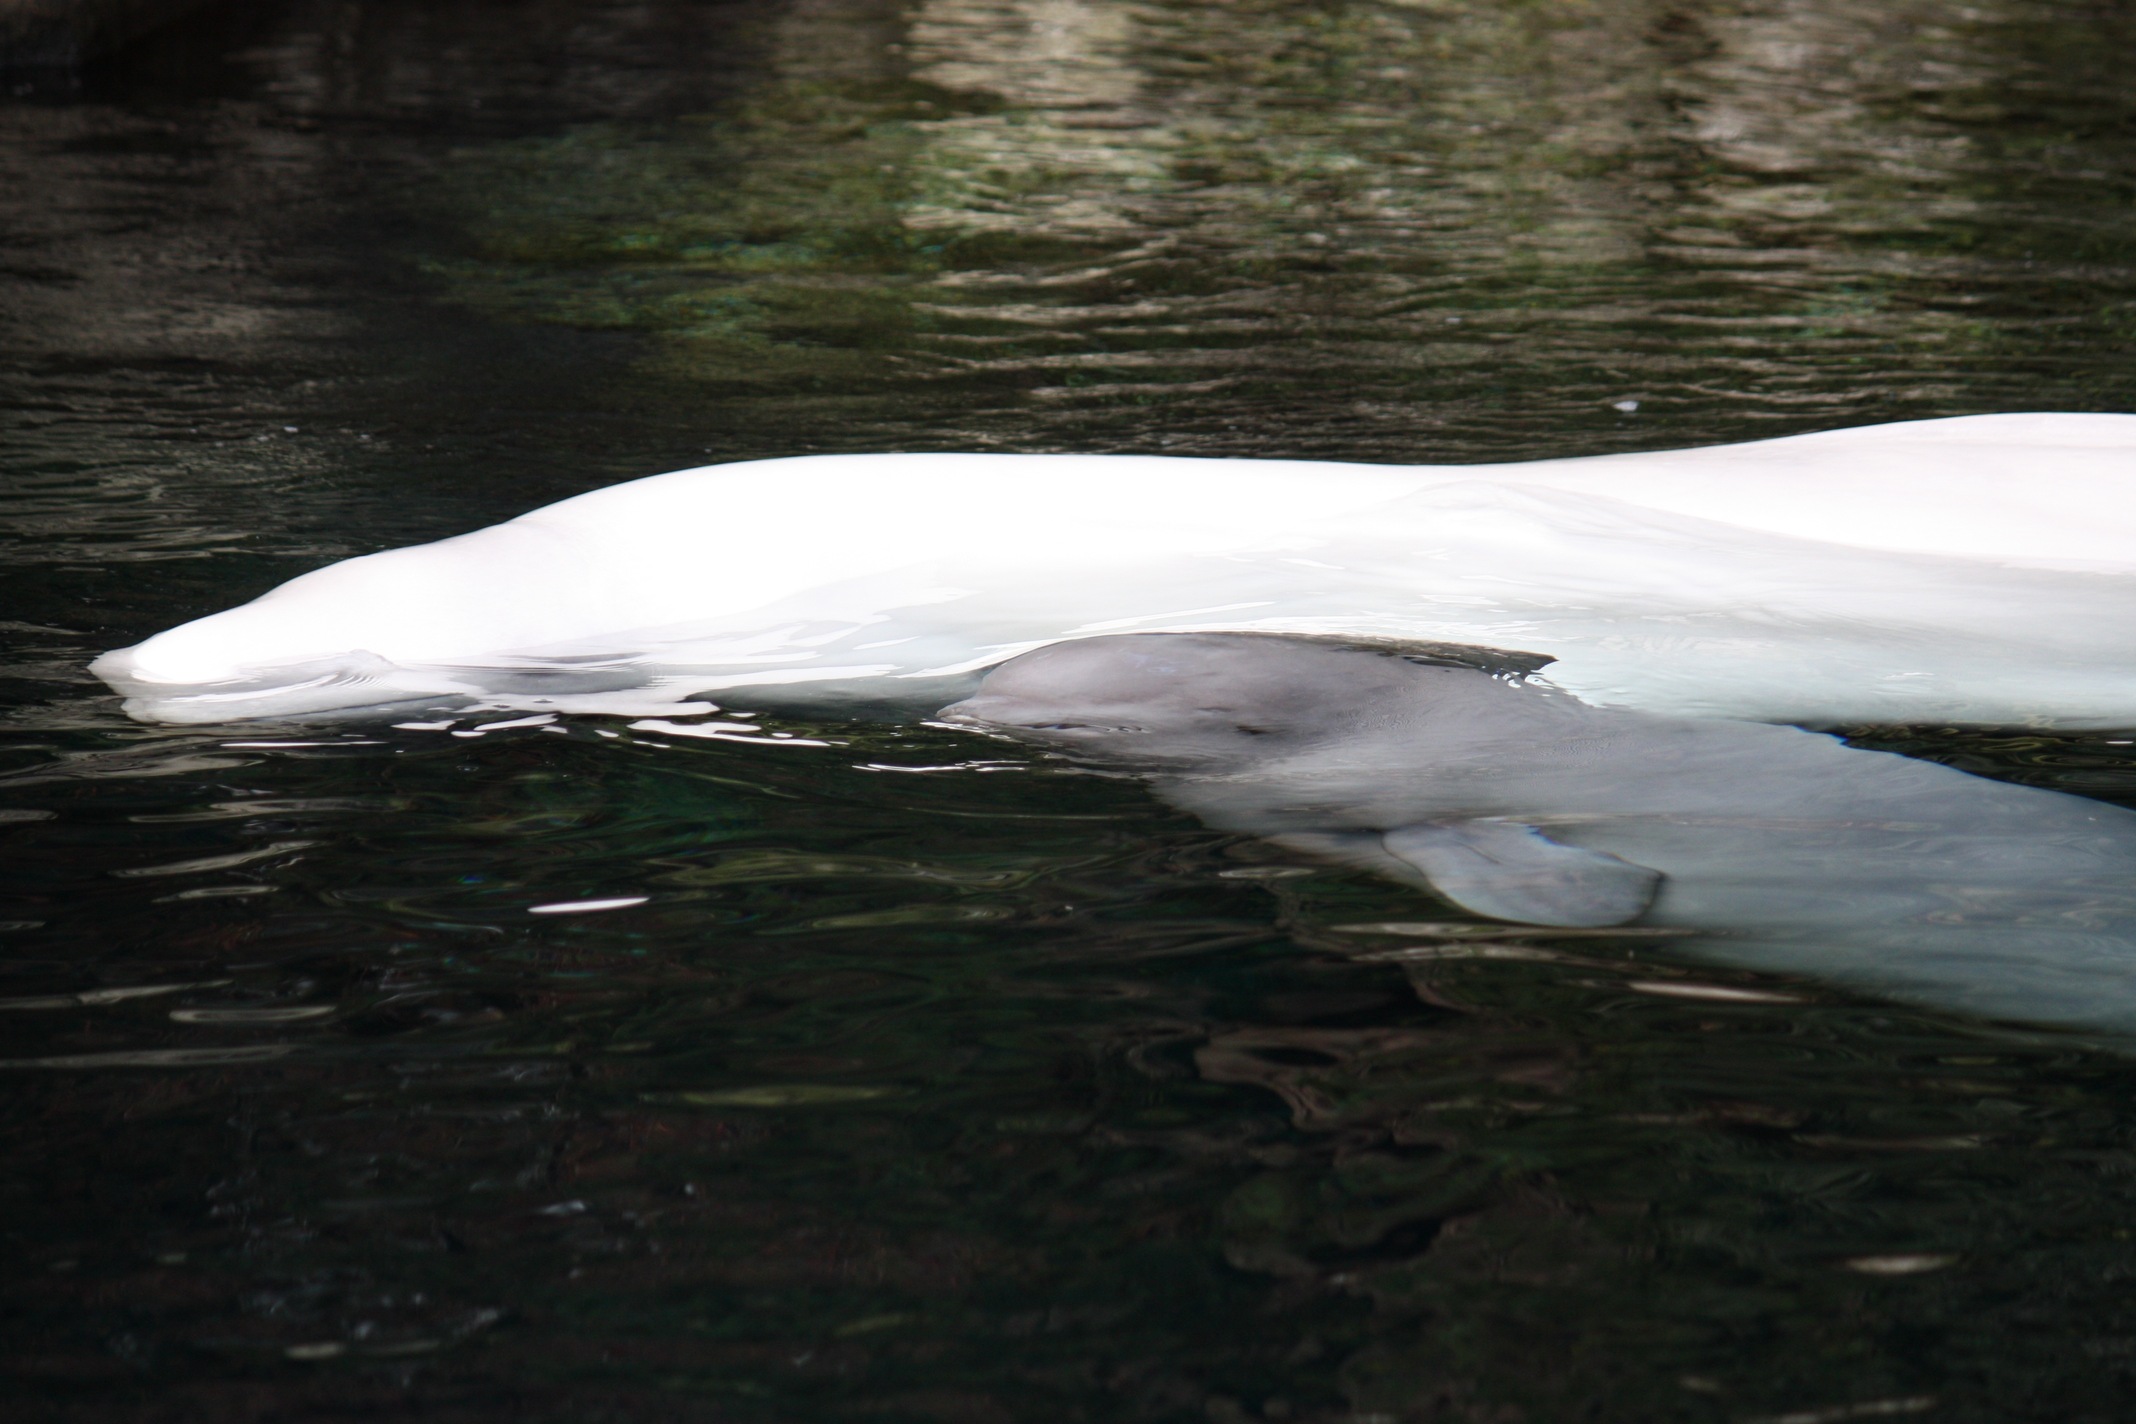 a long white tail floats over the water